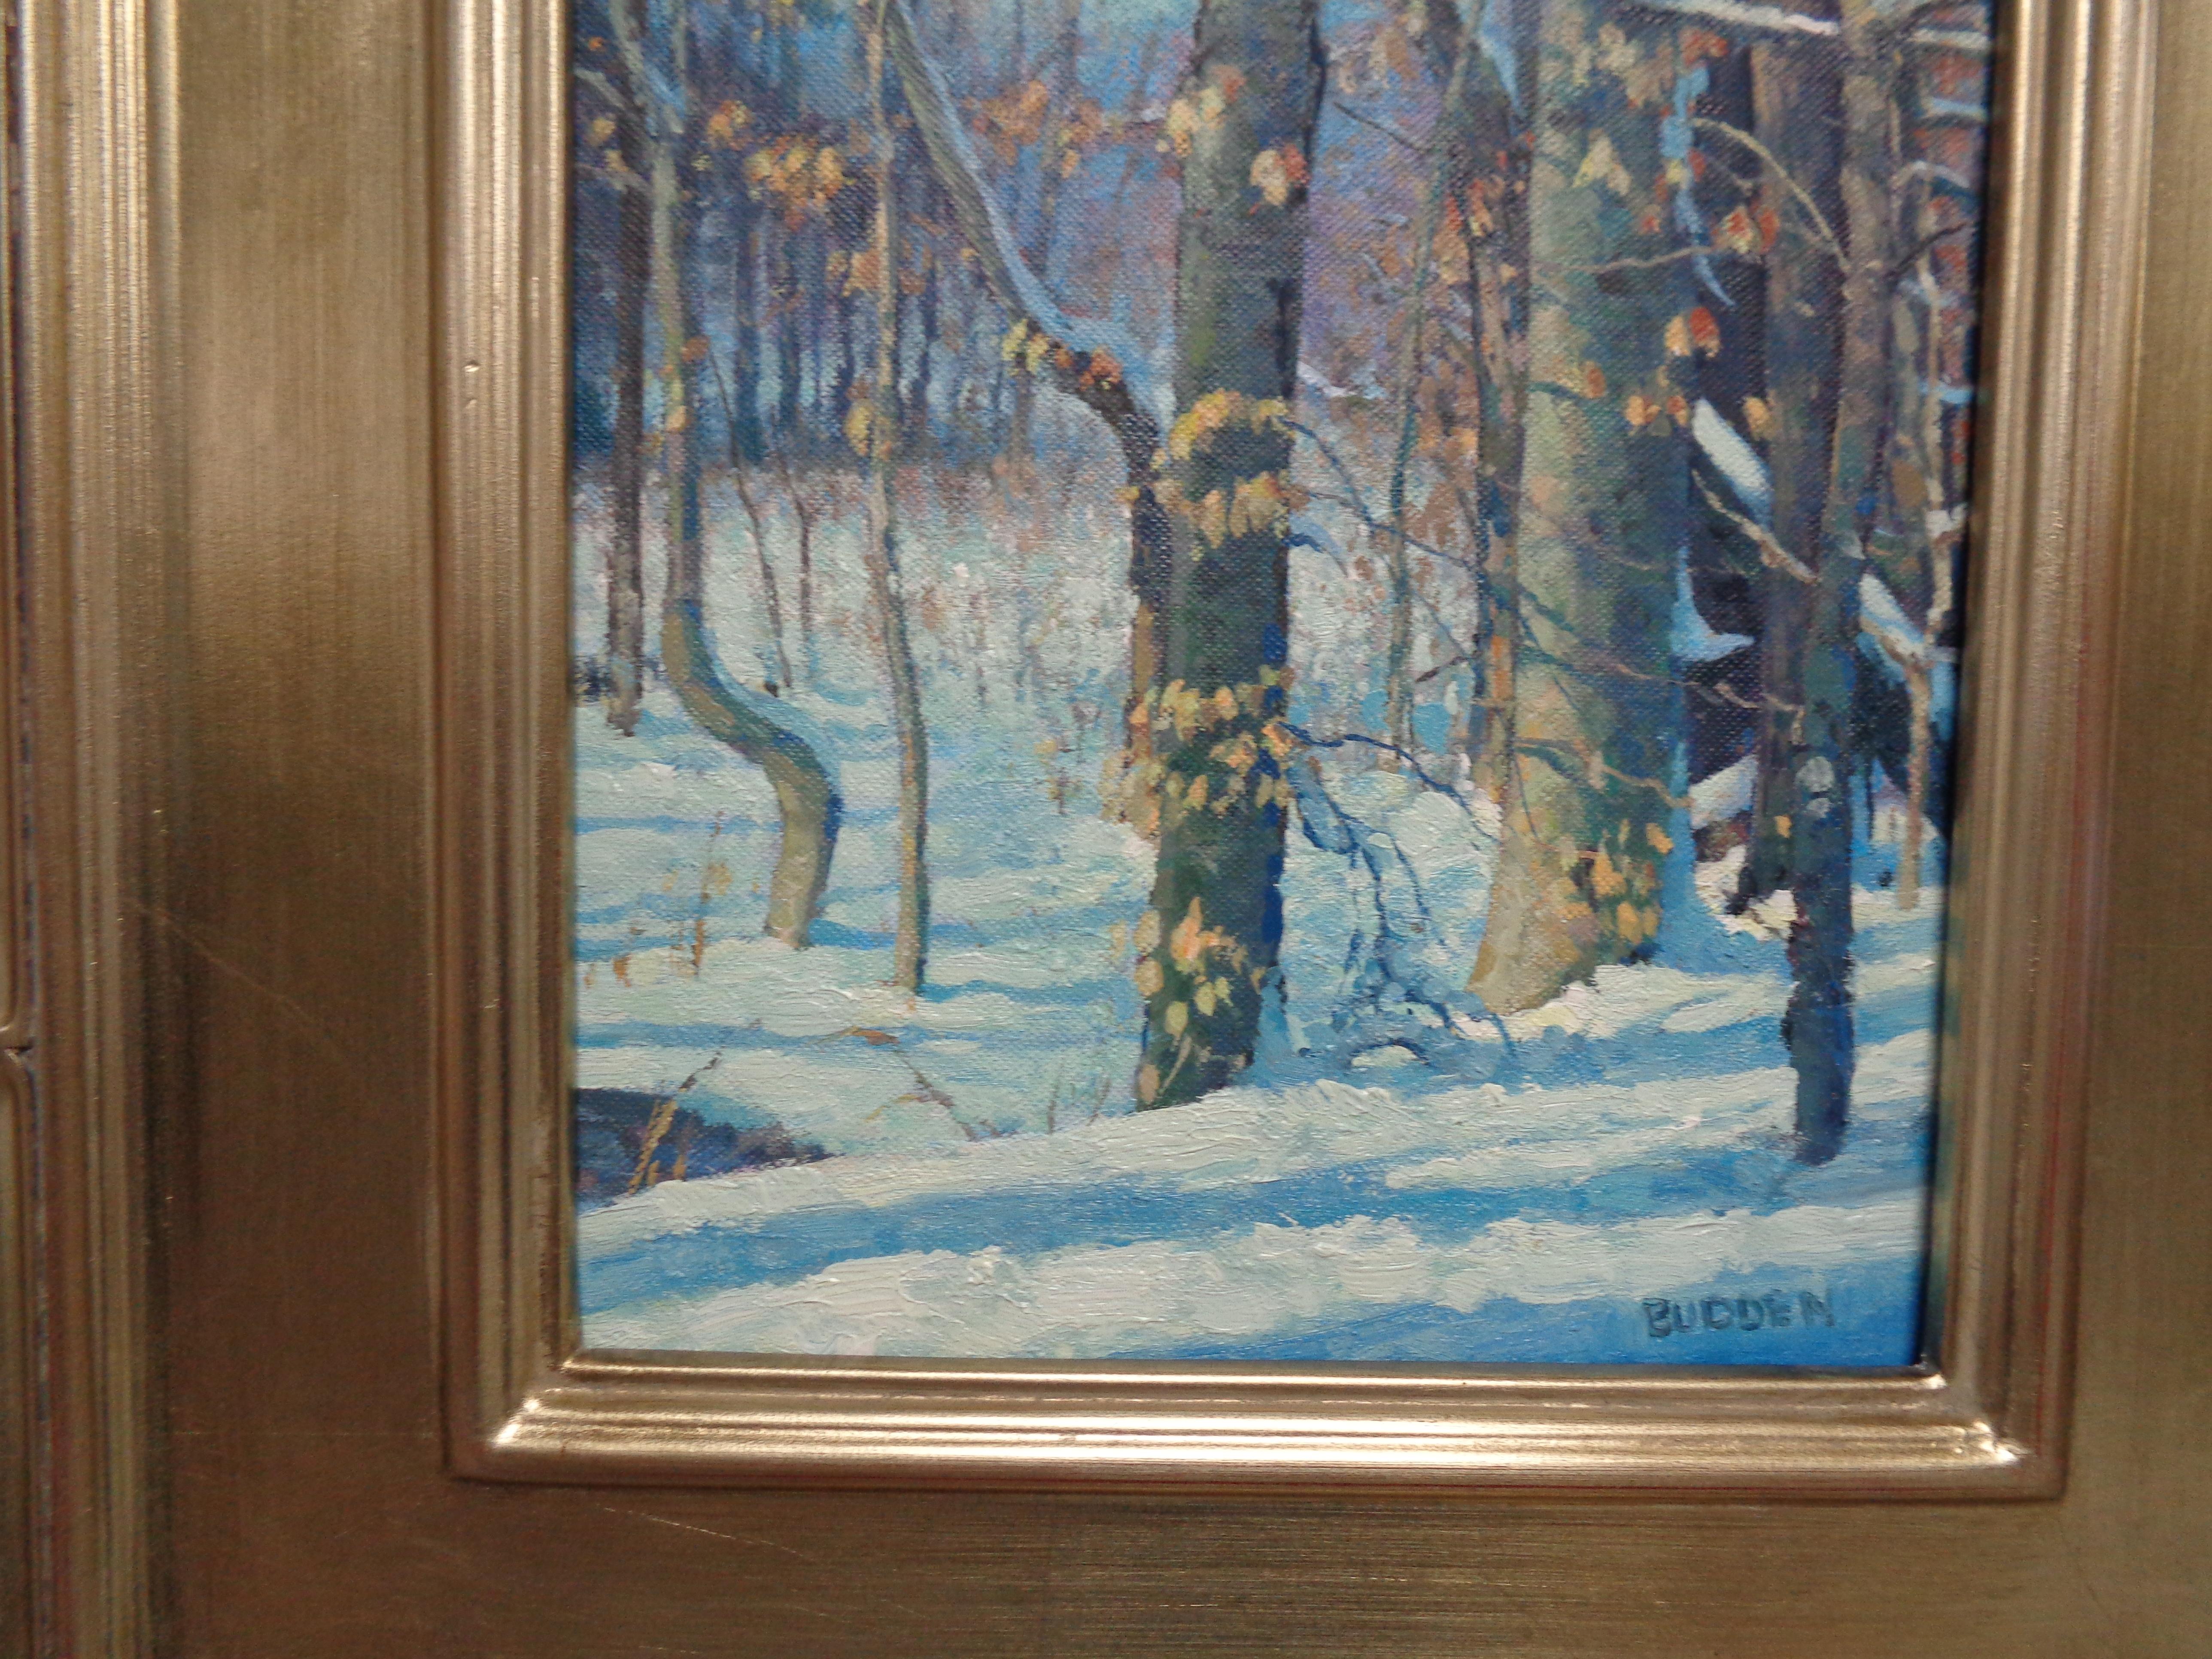   Winter Landscape Oil Painting by Michael Budden Winter Woodland Interior IV  For Sale 3